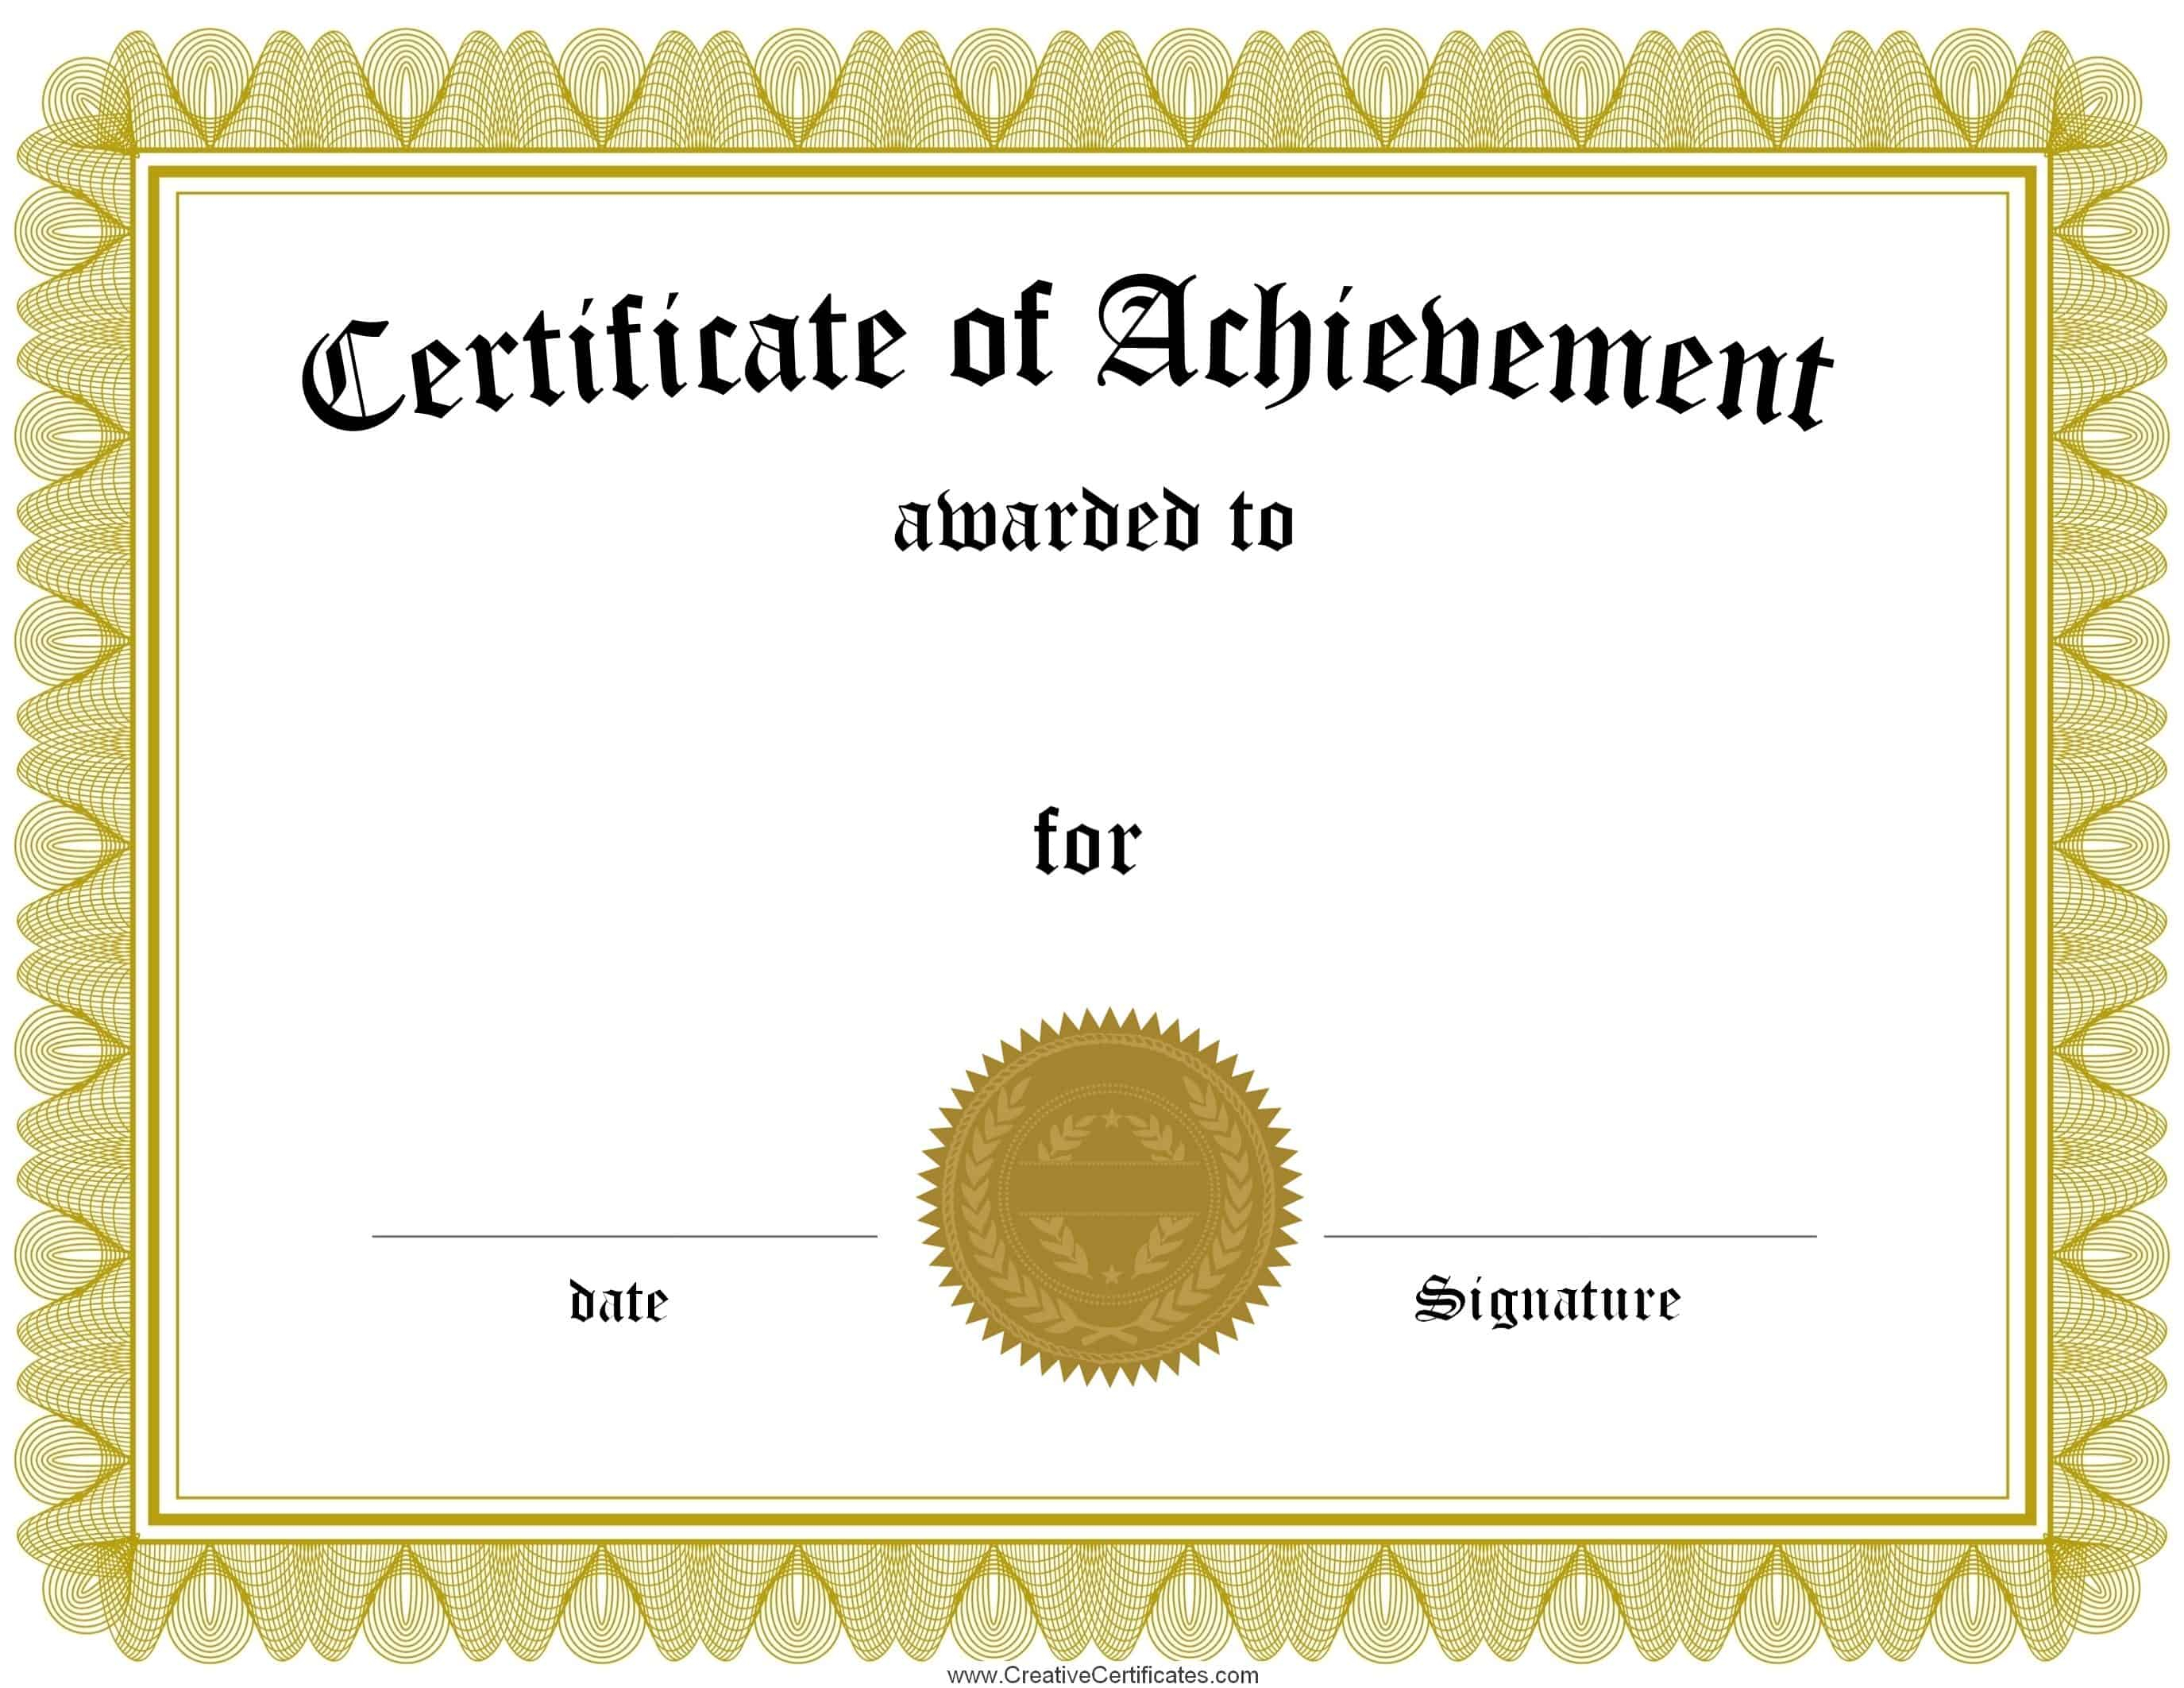 Free Printable Certificate Of Achievement Editable Template Pertaining To Free Printable Certificate Of Achievement Template